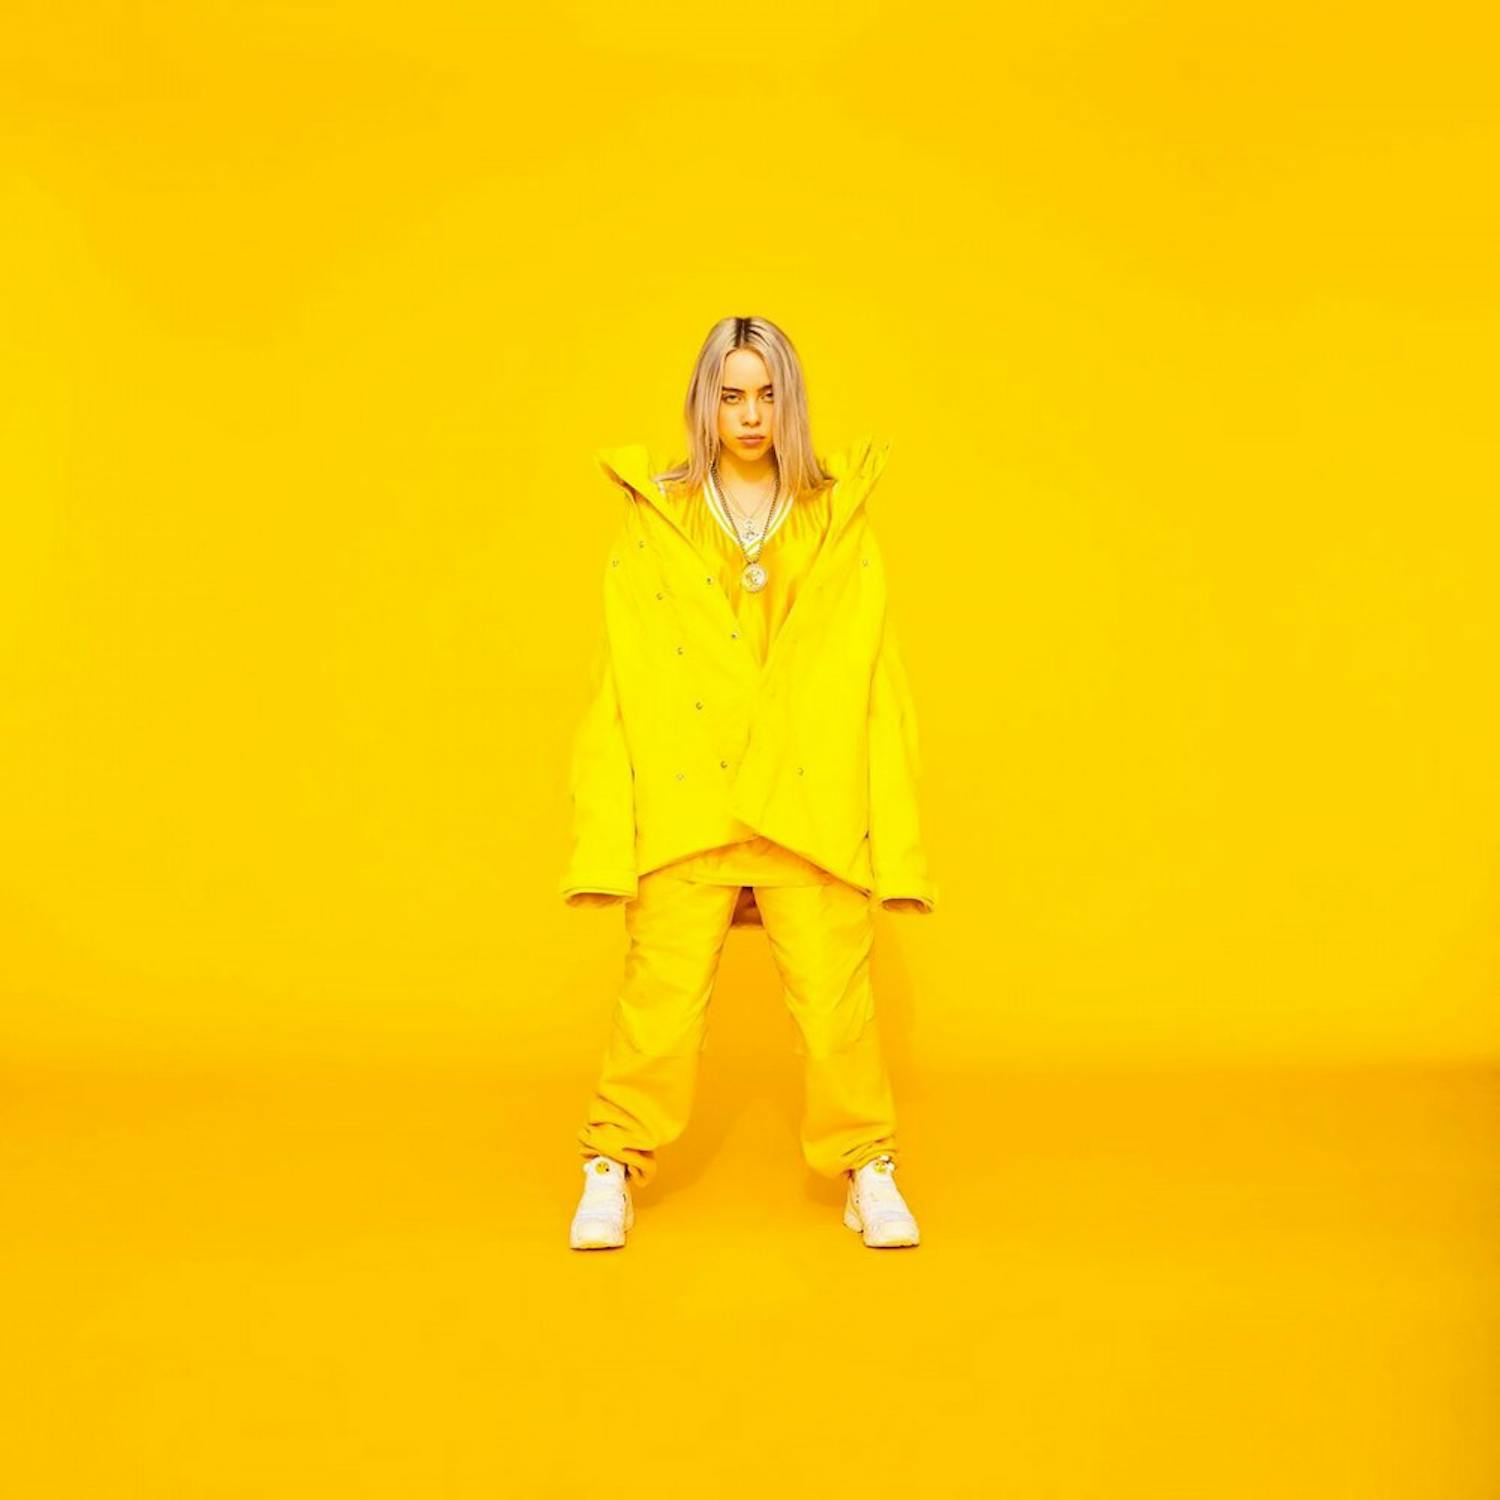 Pop star Billie Eilish is shaking the music industry at just 16-years-old. Eilish talked with The Spectrum in preparation of her upcoming debut album and current U.S. tour.